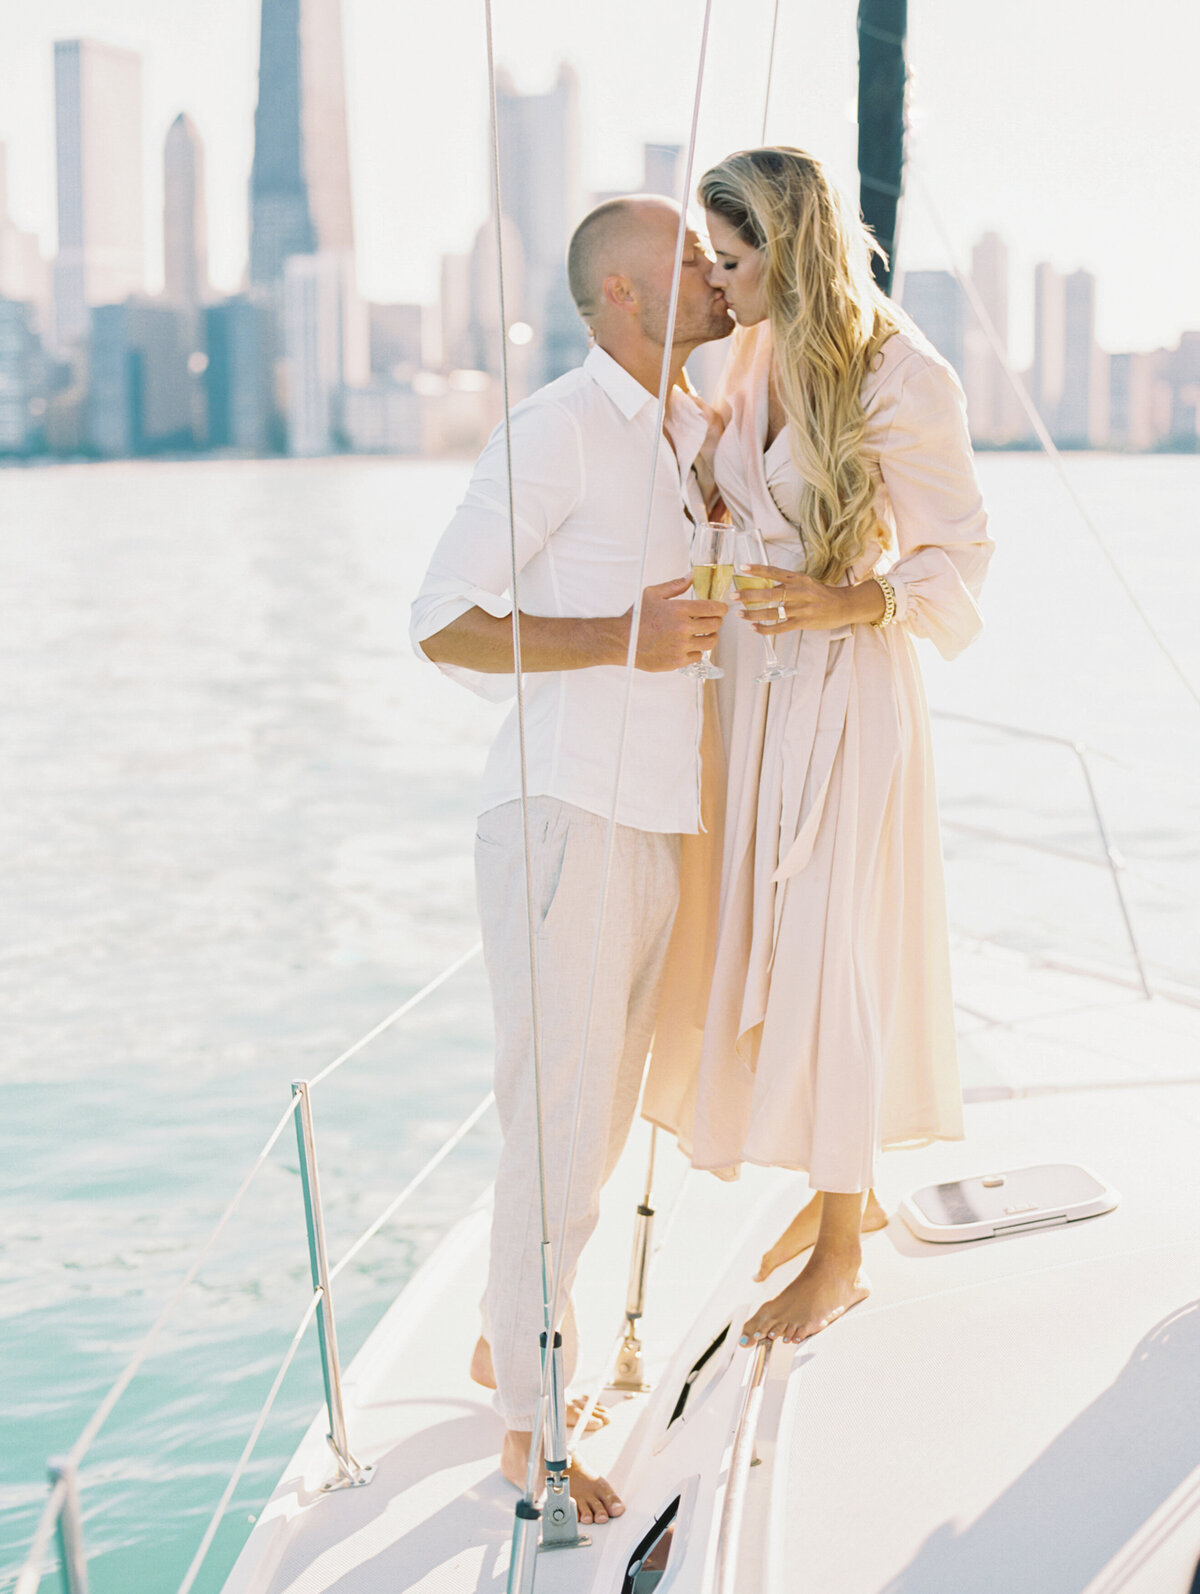 Bride and groom kissing on boat photographed by Chicago editorial wedding photographer Arielle Peters